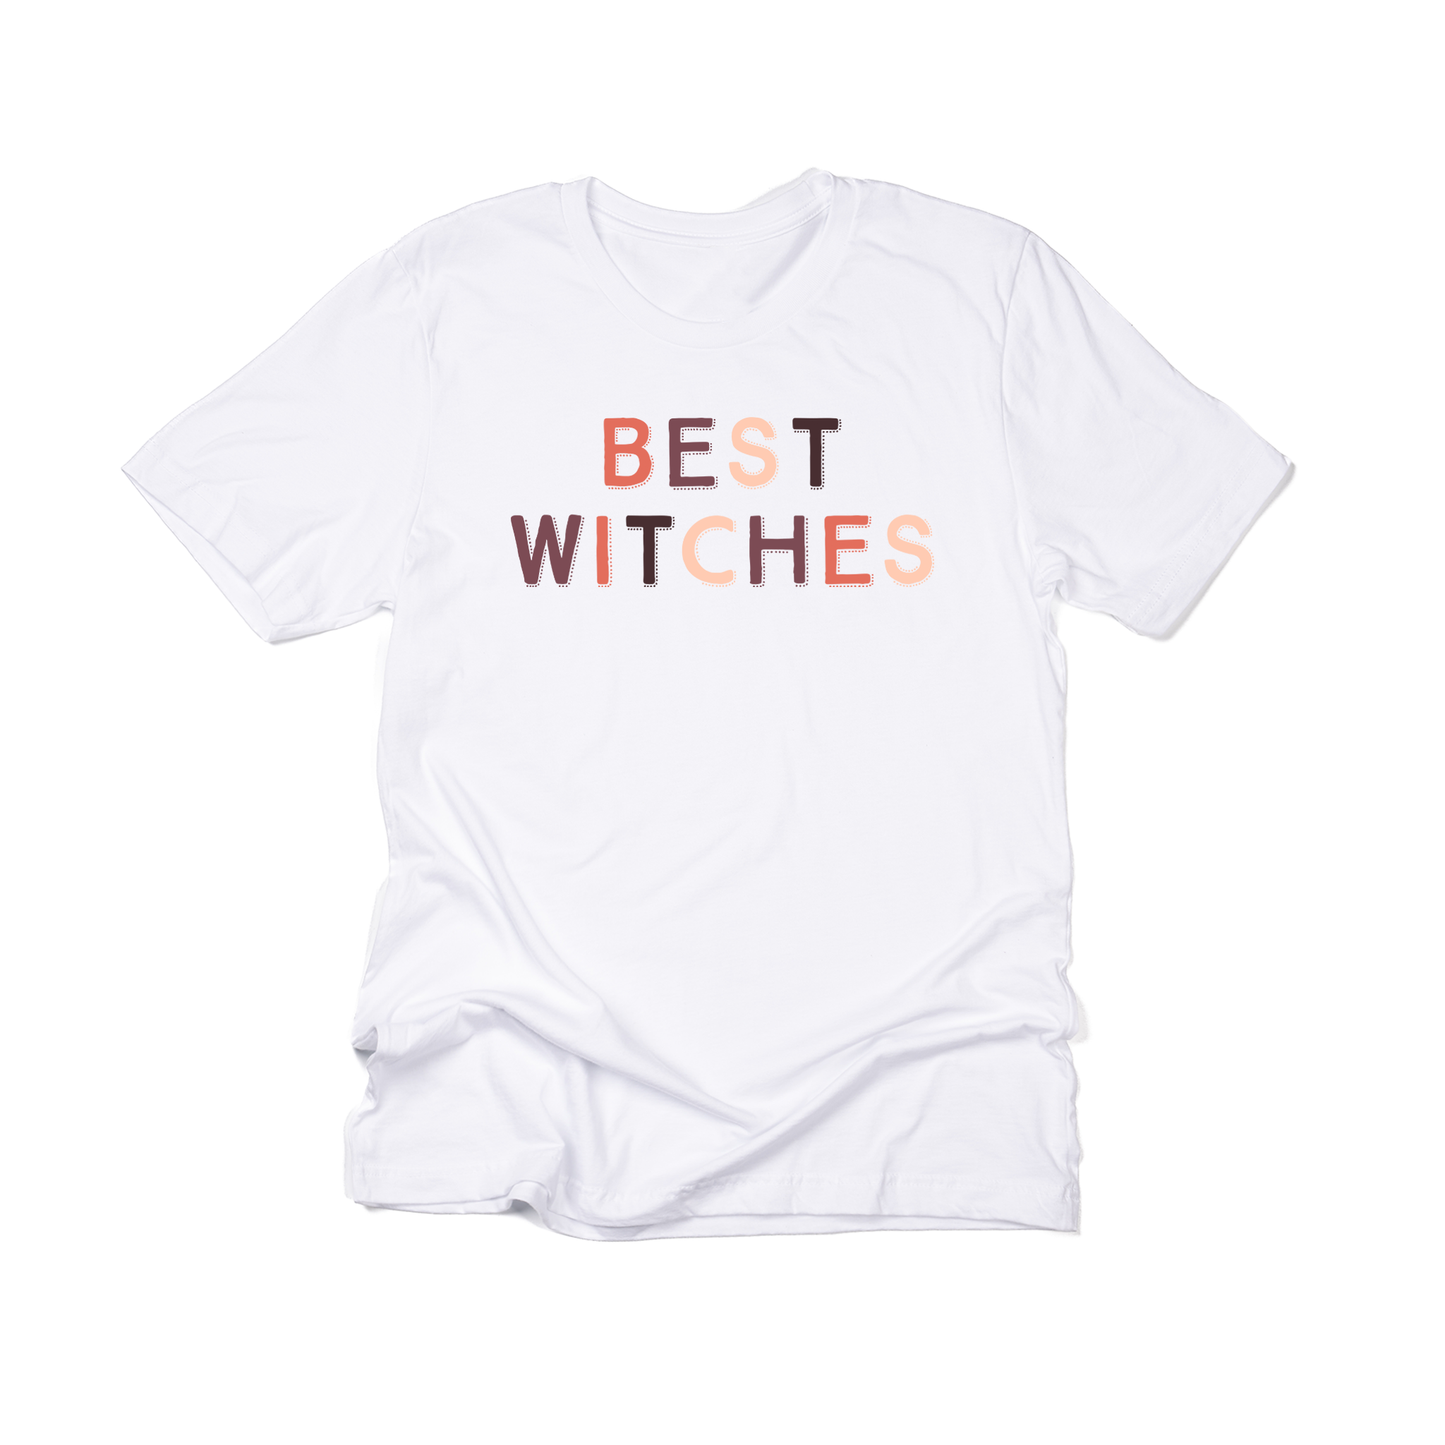 Best Witches - Tee (White)